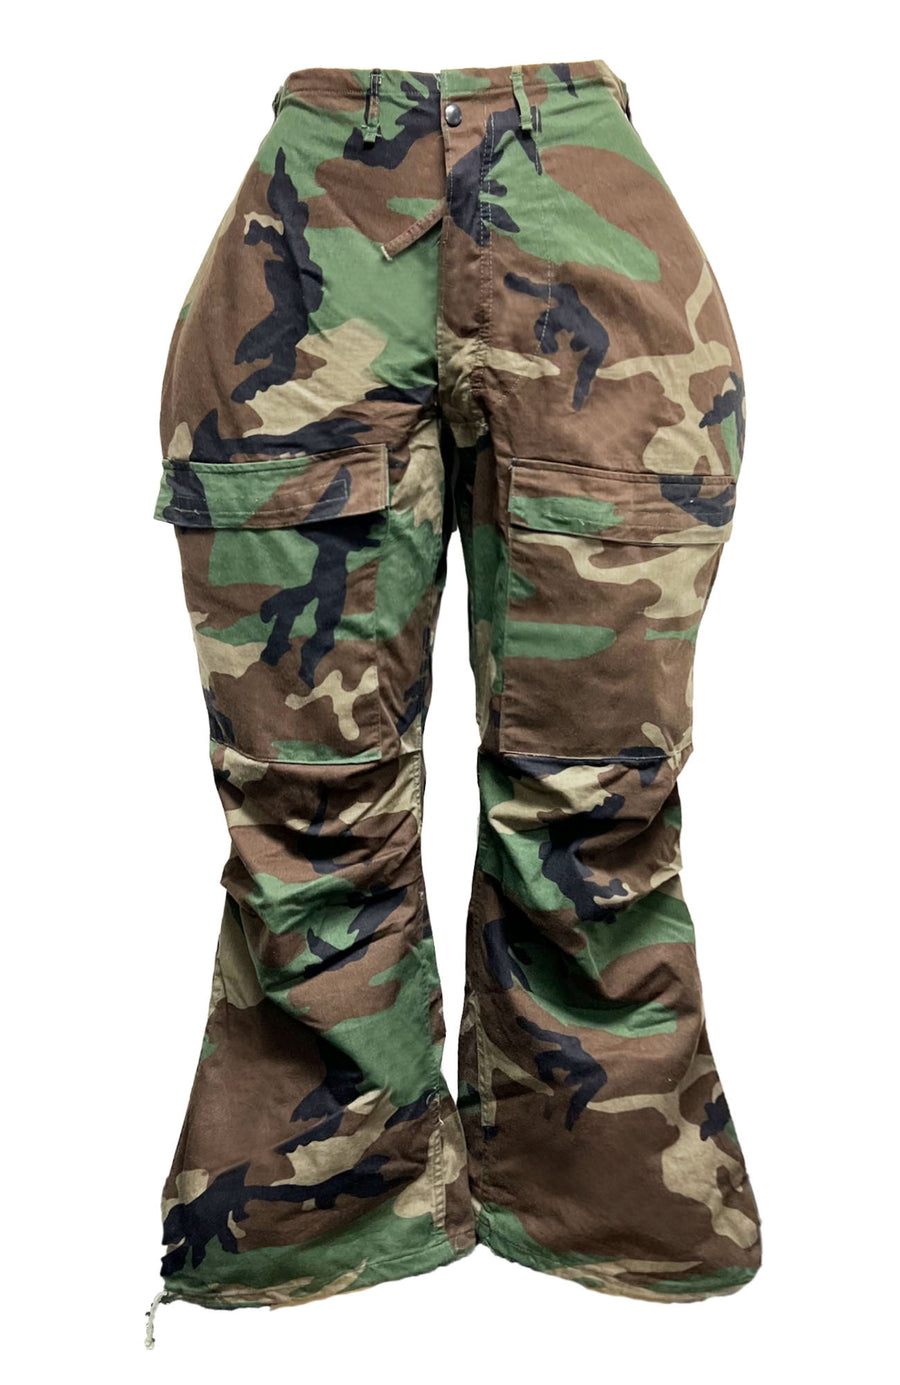 The Vintage Camo Pant in Army "Mission 1" ♻️